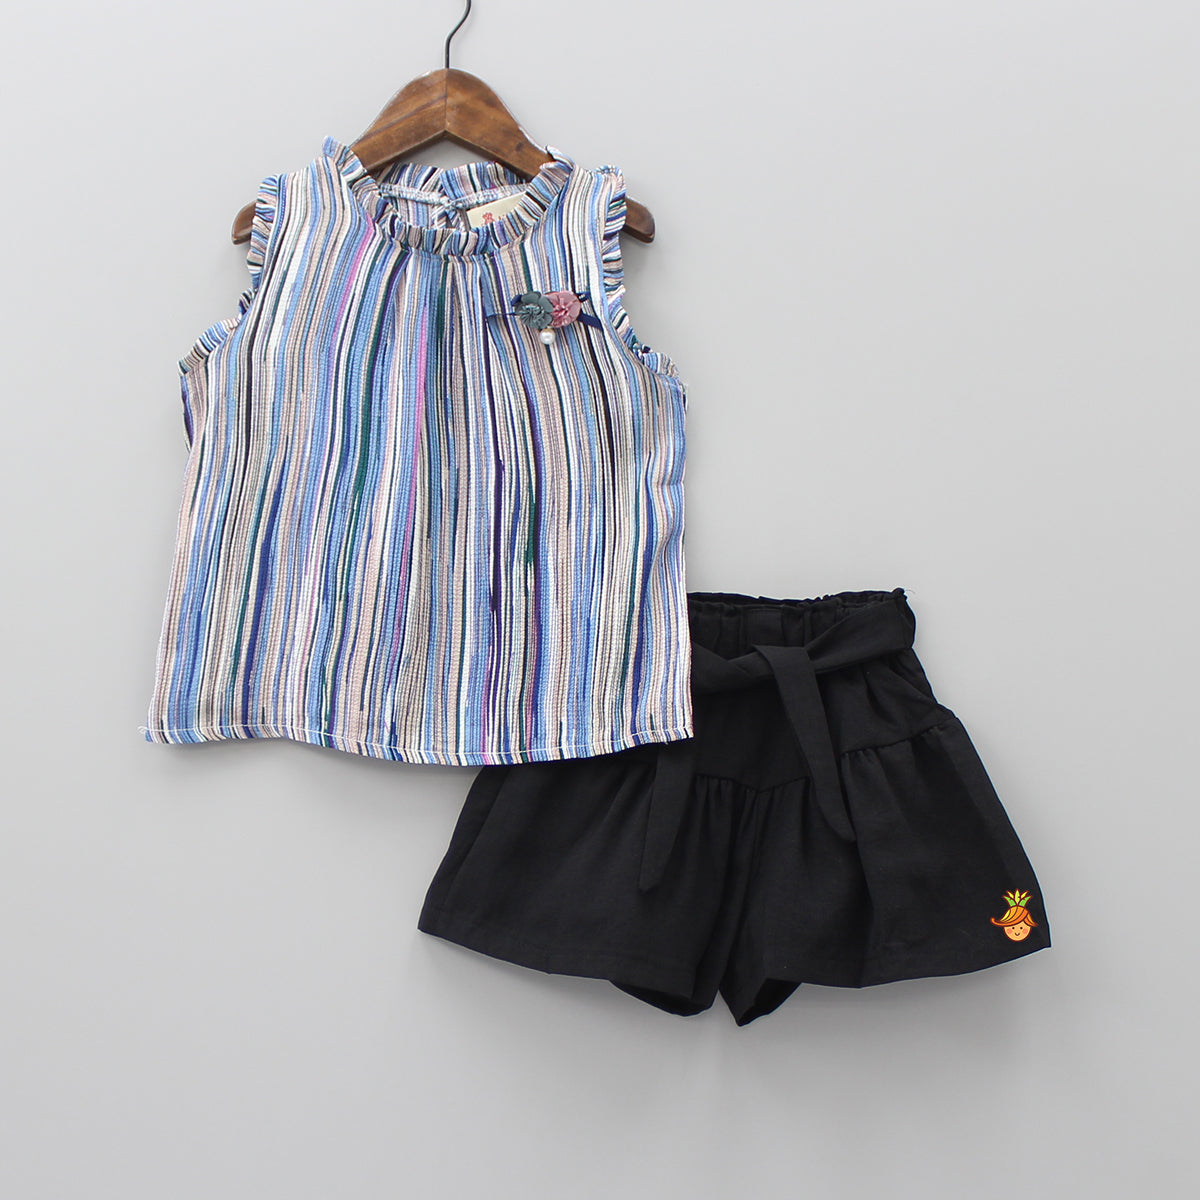 Multicolour Striped Top And Black Shorts Set